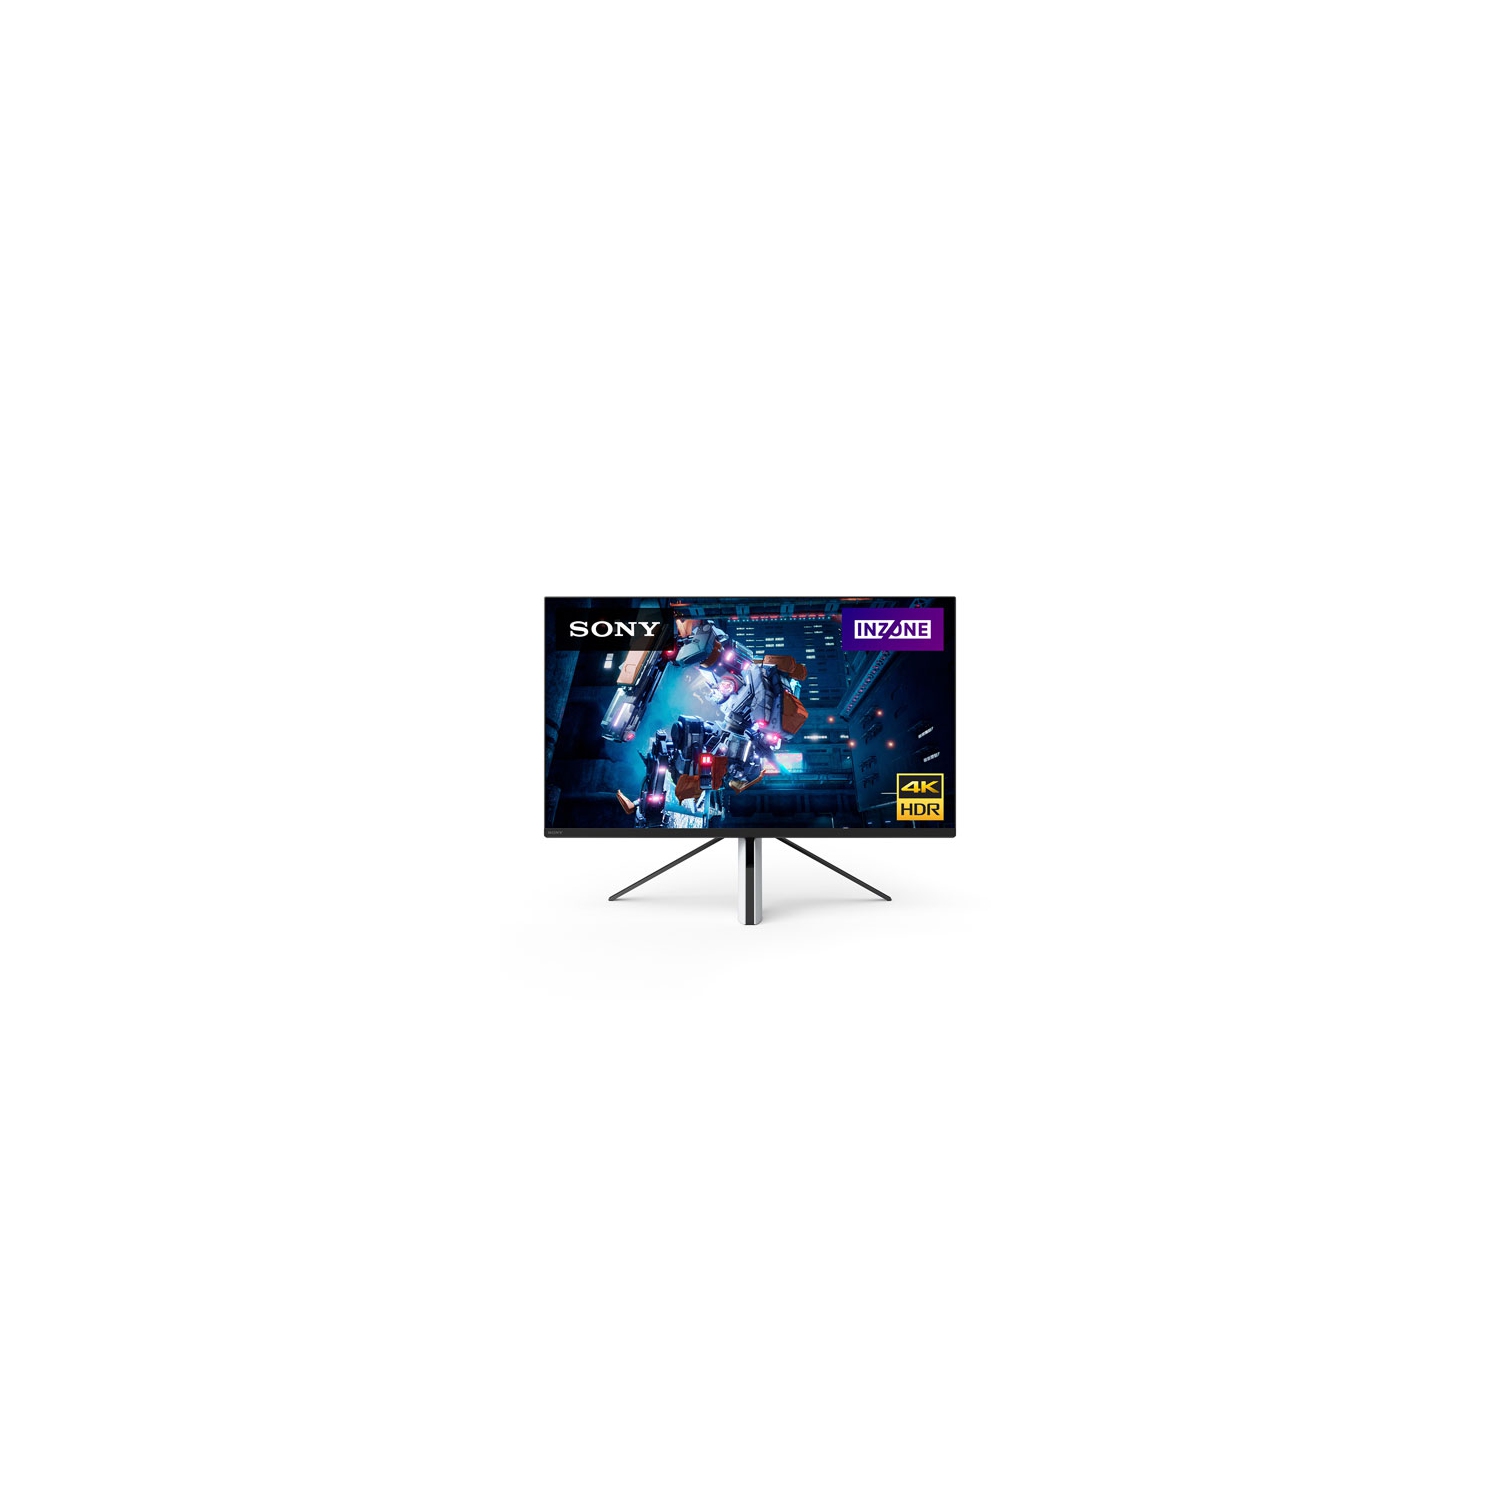 Refurbished (Excellent) - Sony INZONE M9 27" 4K Ultra HD 144Hz 1ms GTG IPS LED Gaming Monitor (SDMU27M90) - White